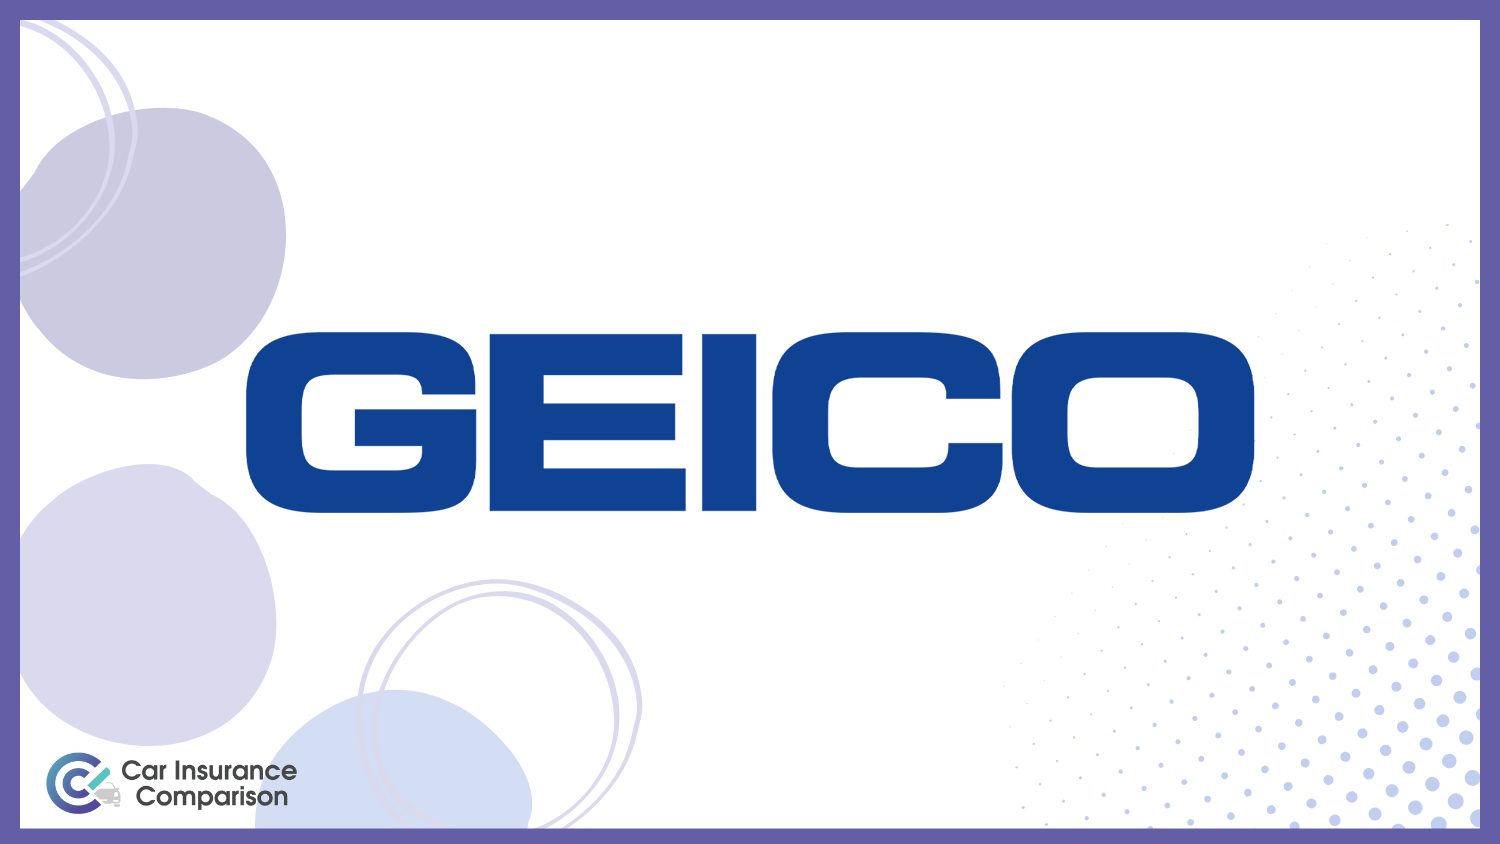 Geico: Cheap Car Insurance for Older Vehicles